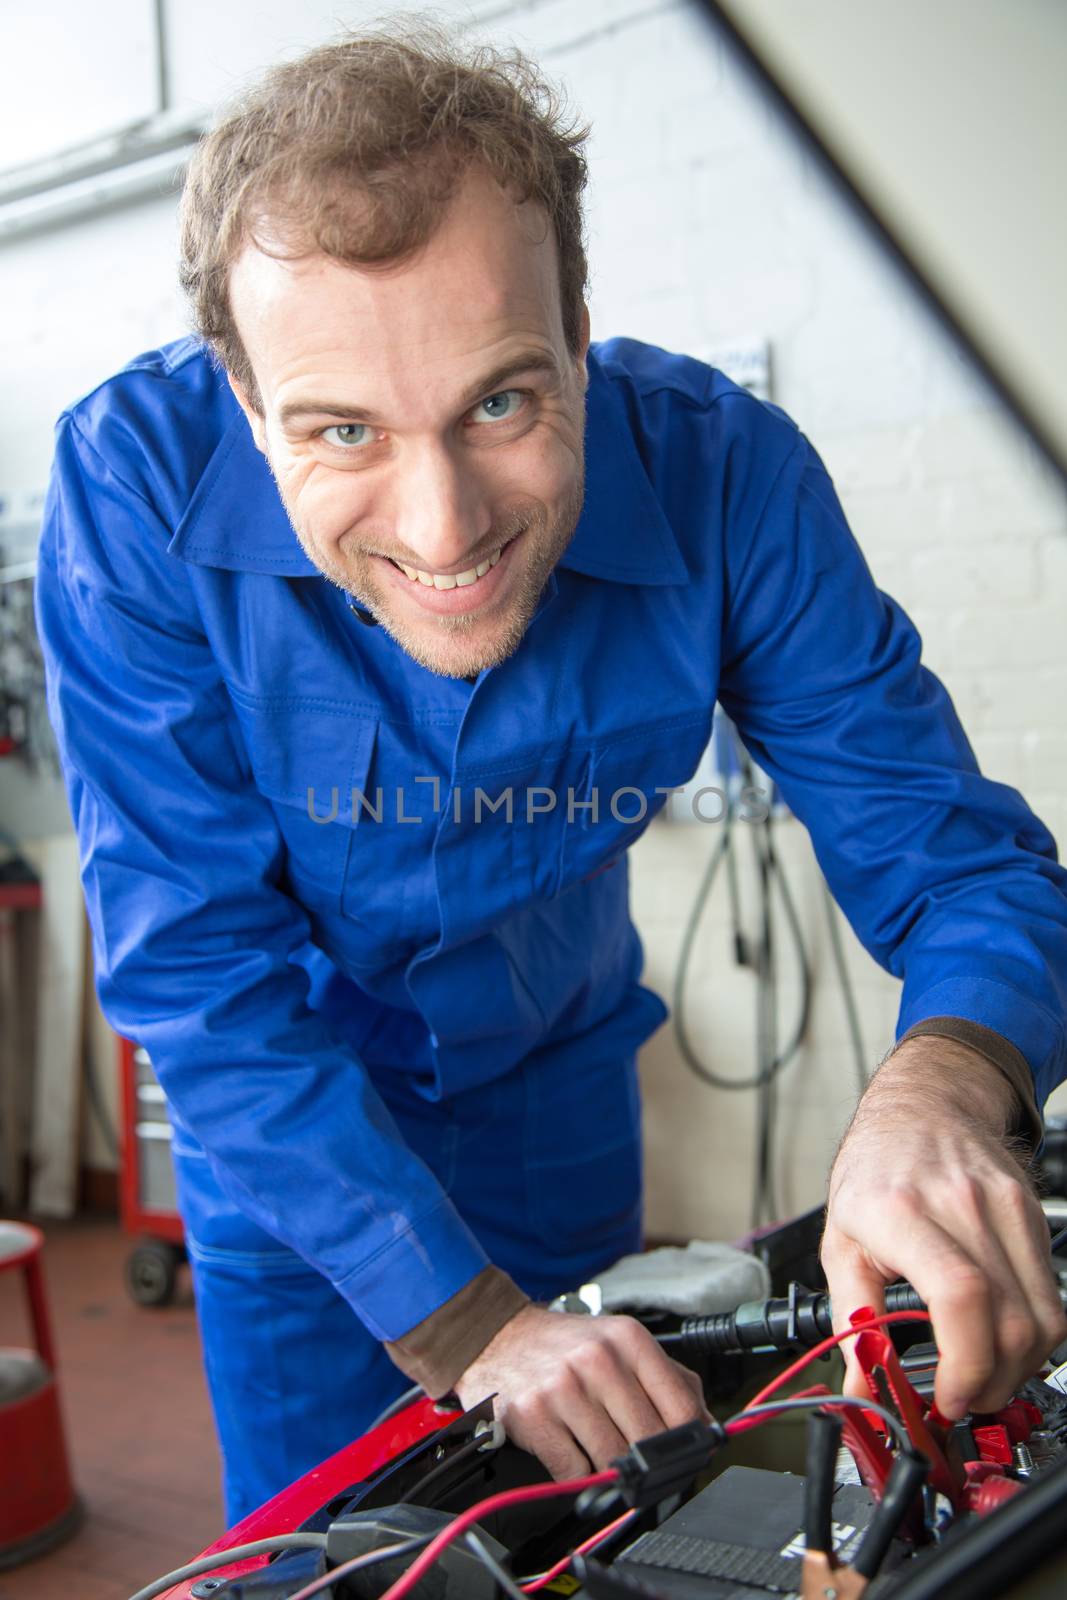 Car mechanic repairing a automobile in a garage or workshop